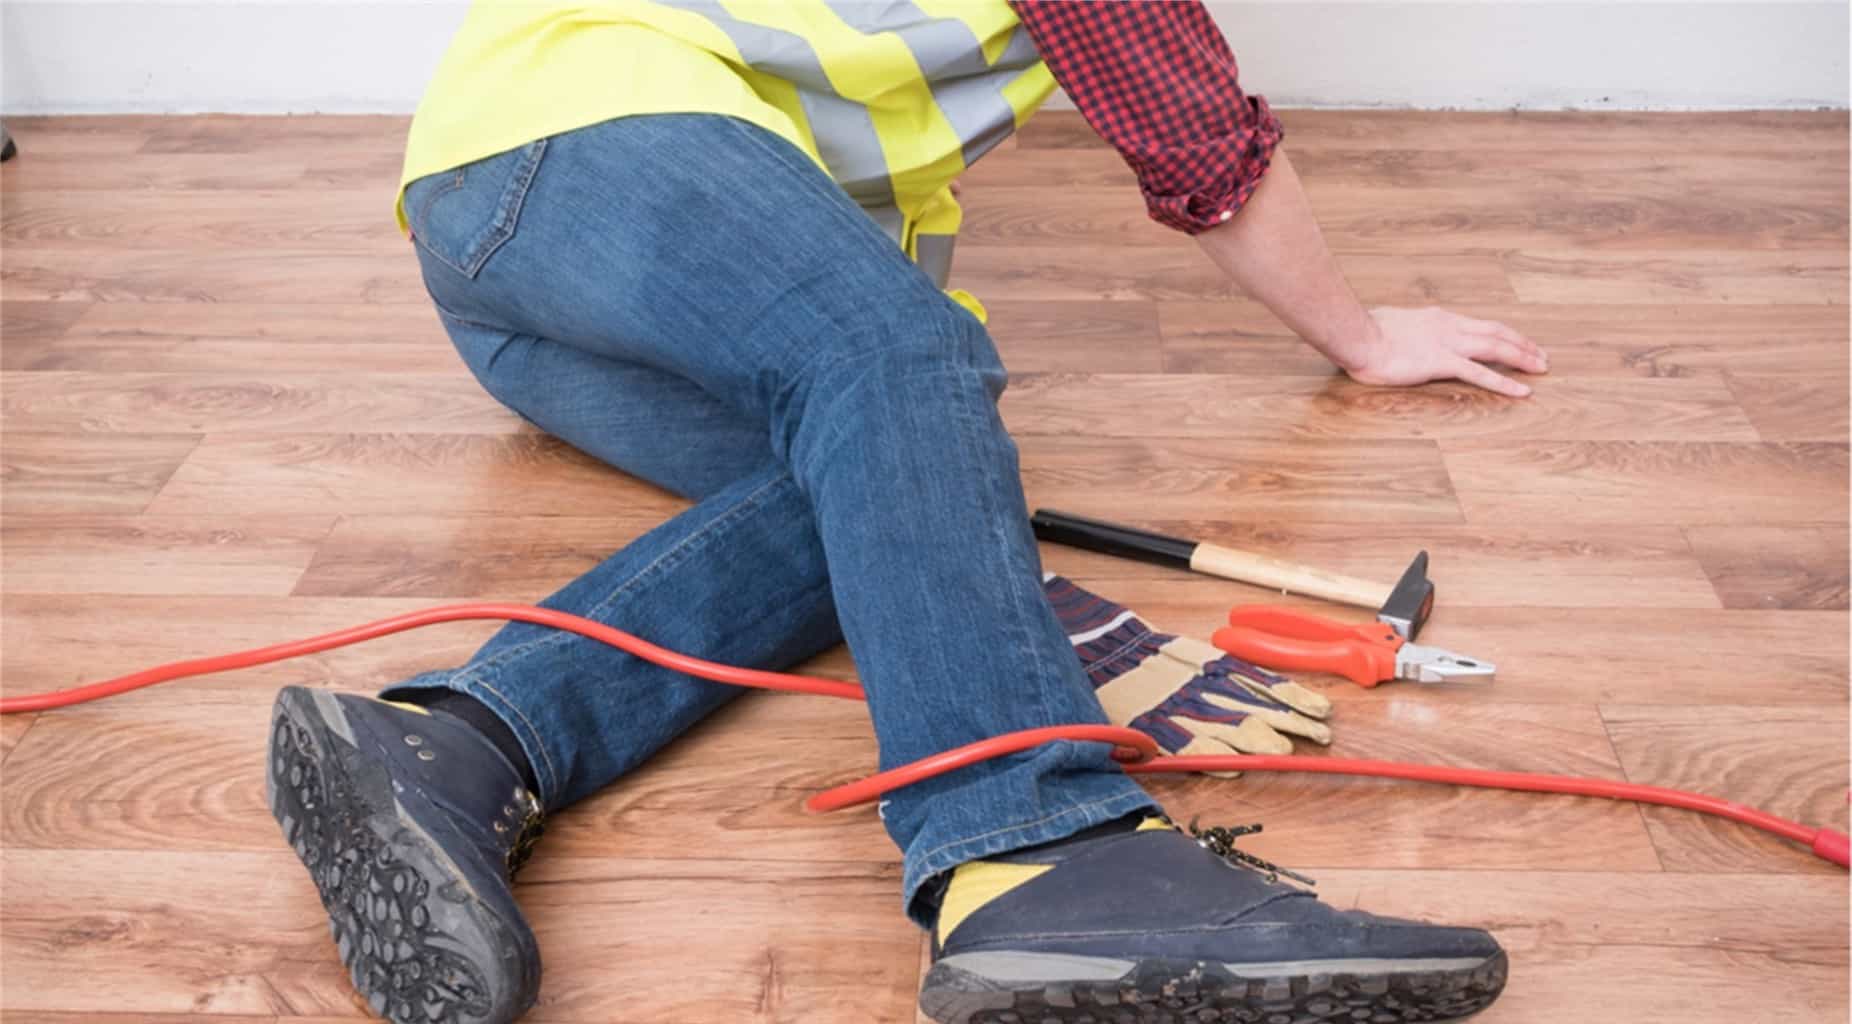 man tripped and fell over extension cord